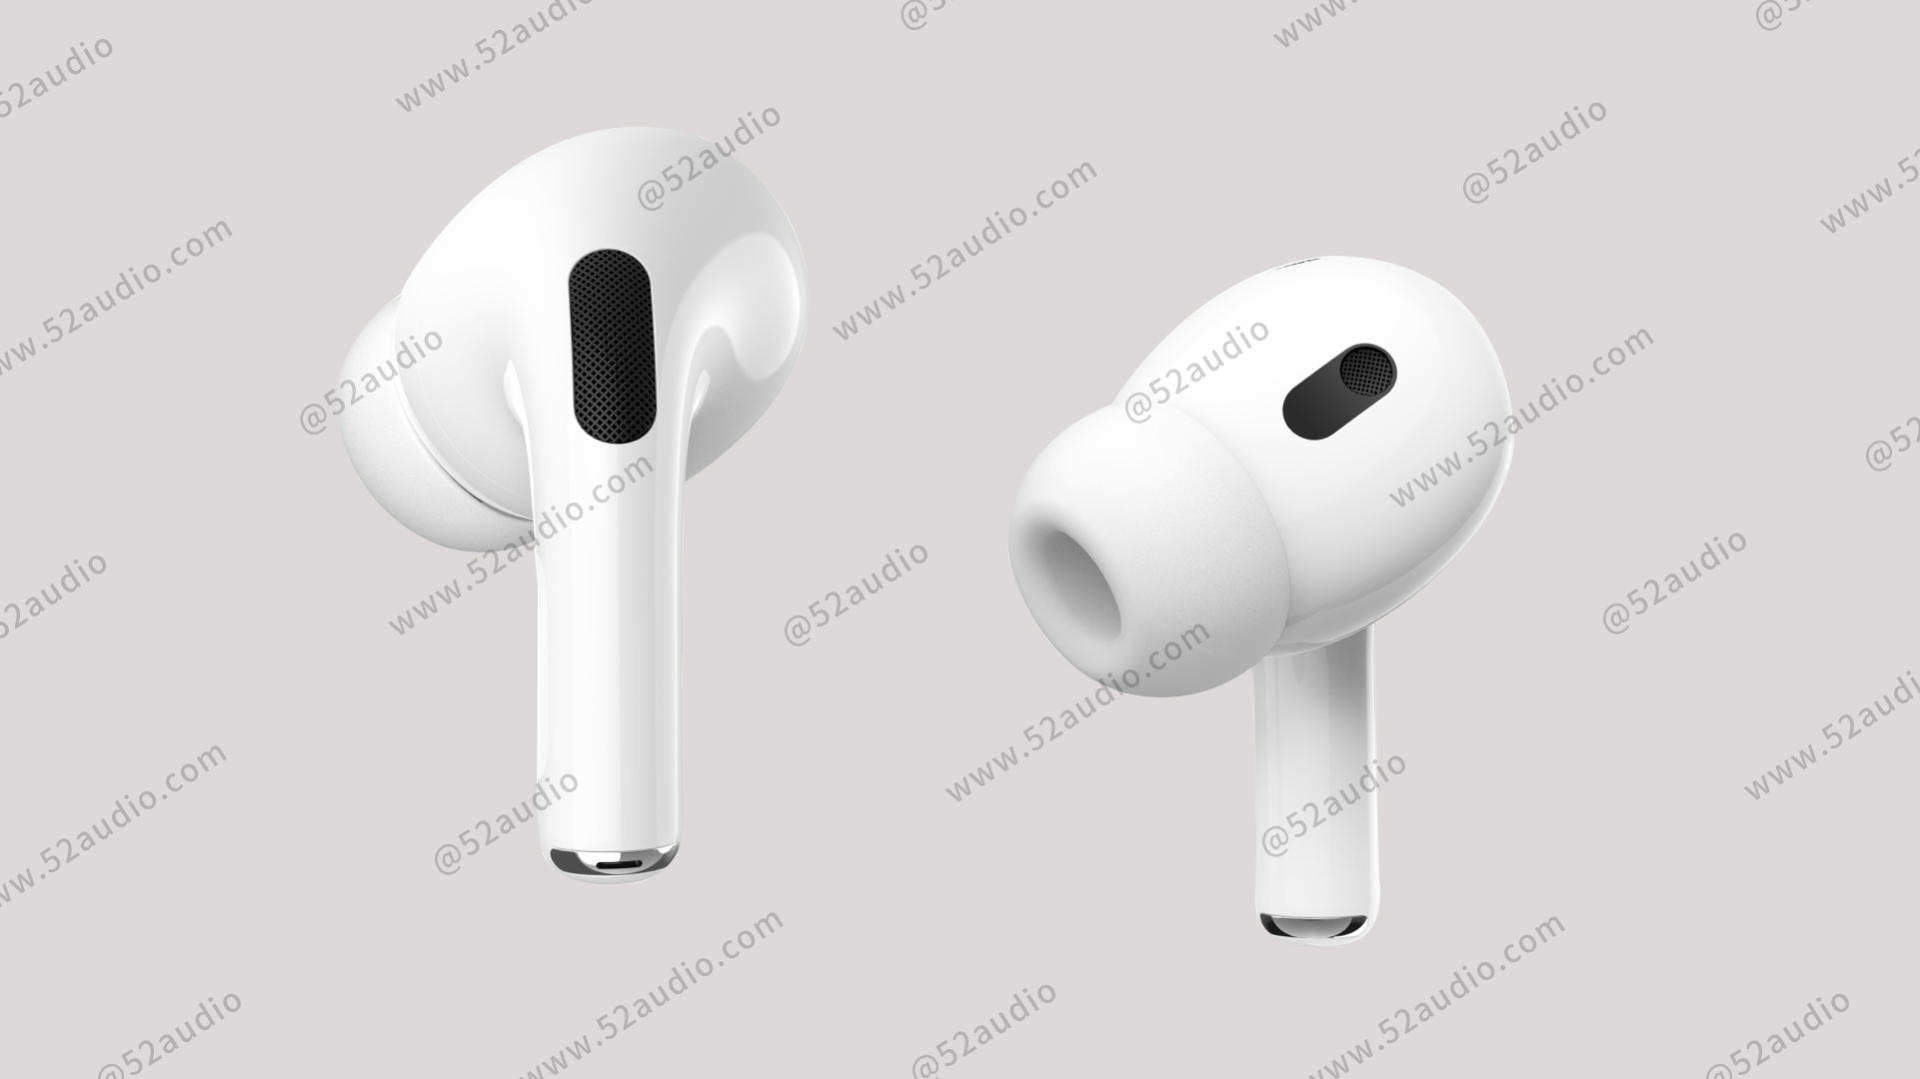 An image of the rumored Apple Airpods Pro 2